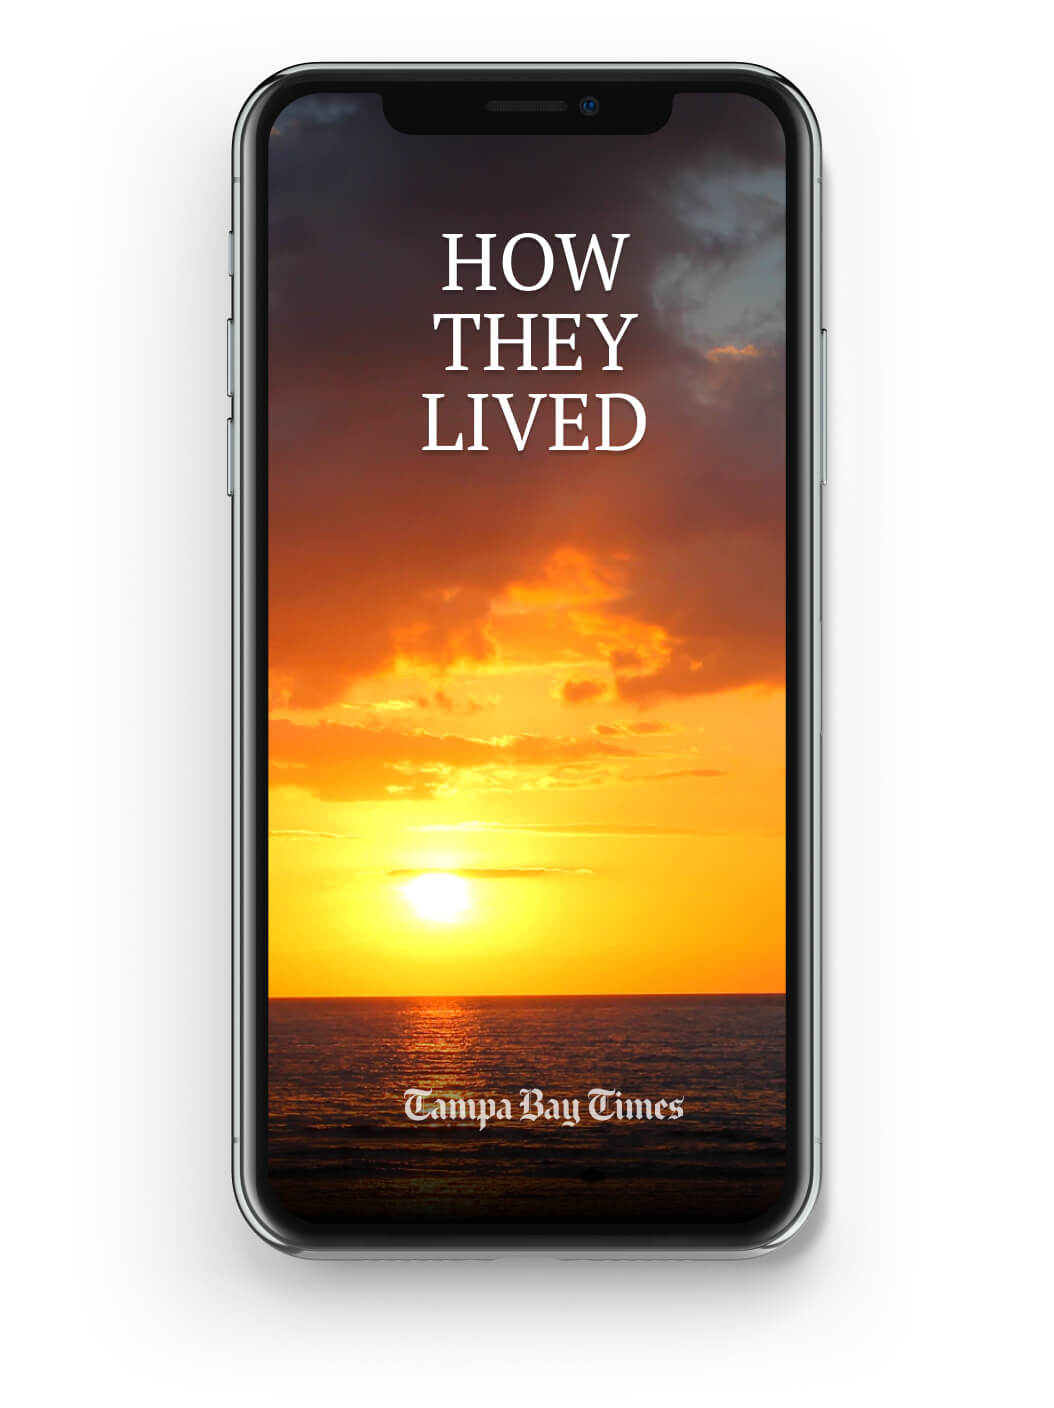 The Tampa Bay Times 'How They Lived' newsletter